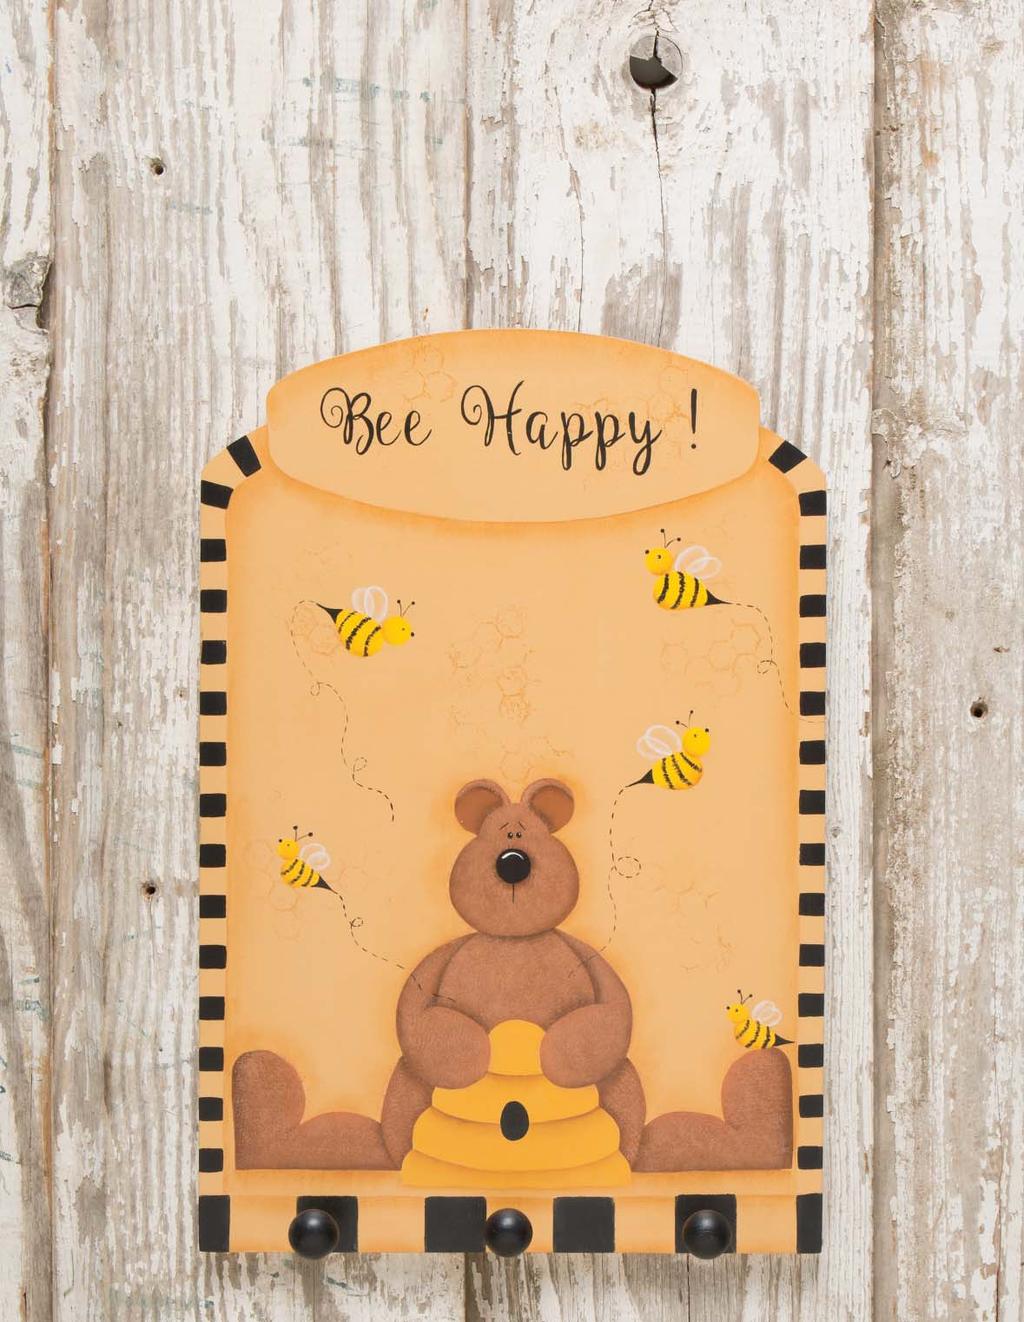 BEE HAPPY by